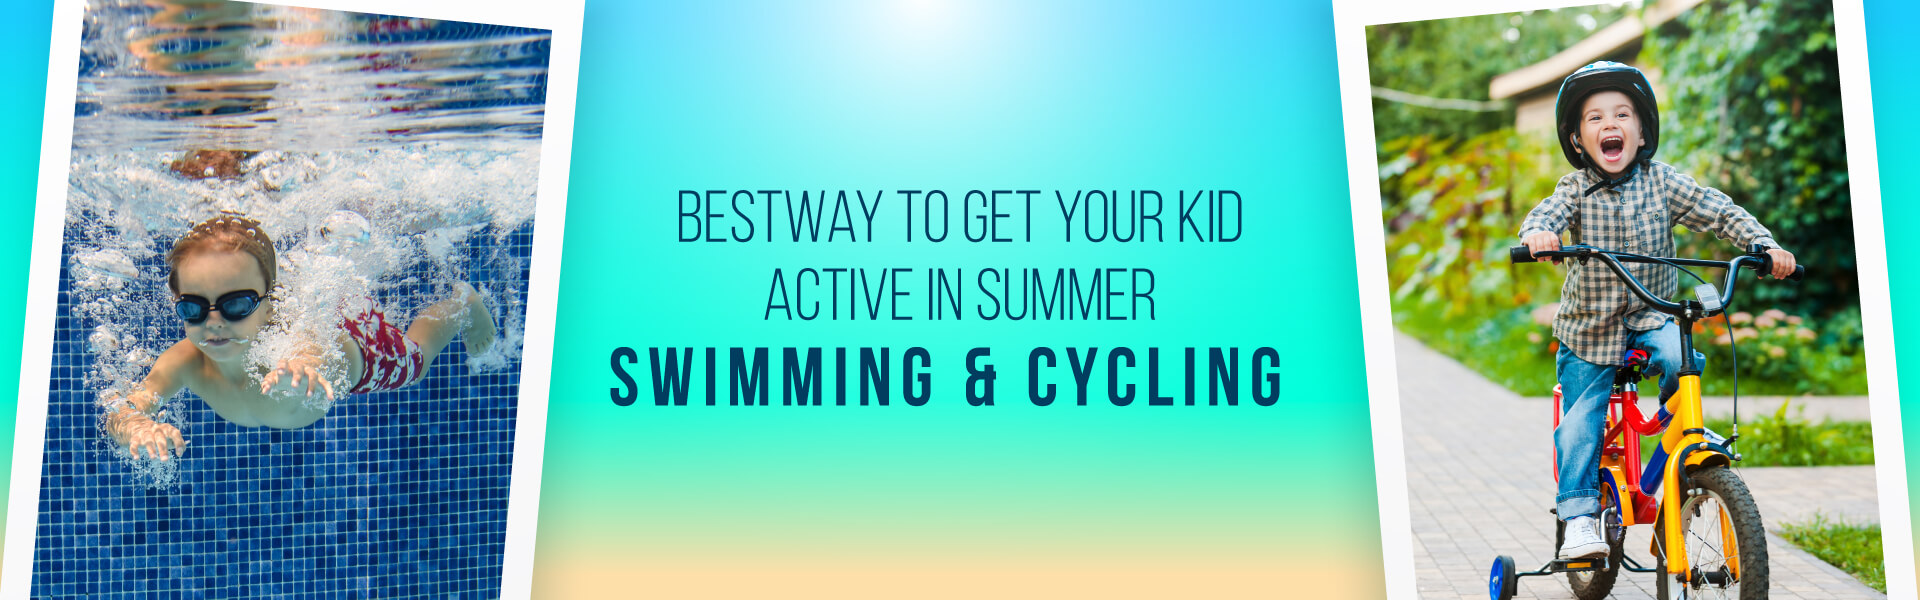 Bestway to get your kid active in summer Swimming & Cycling